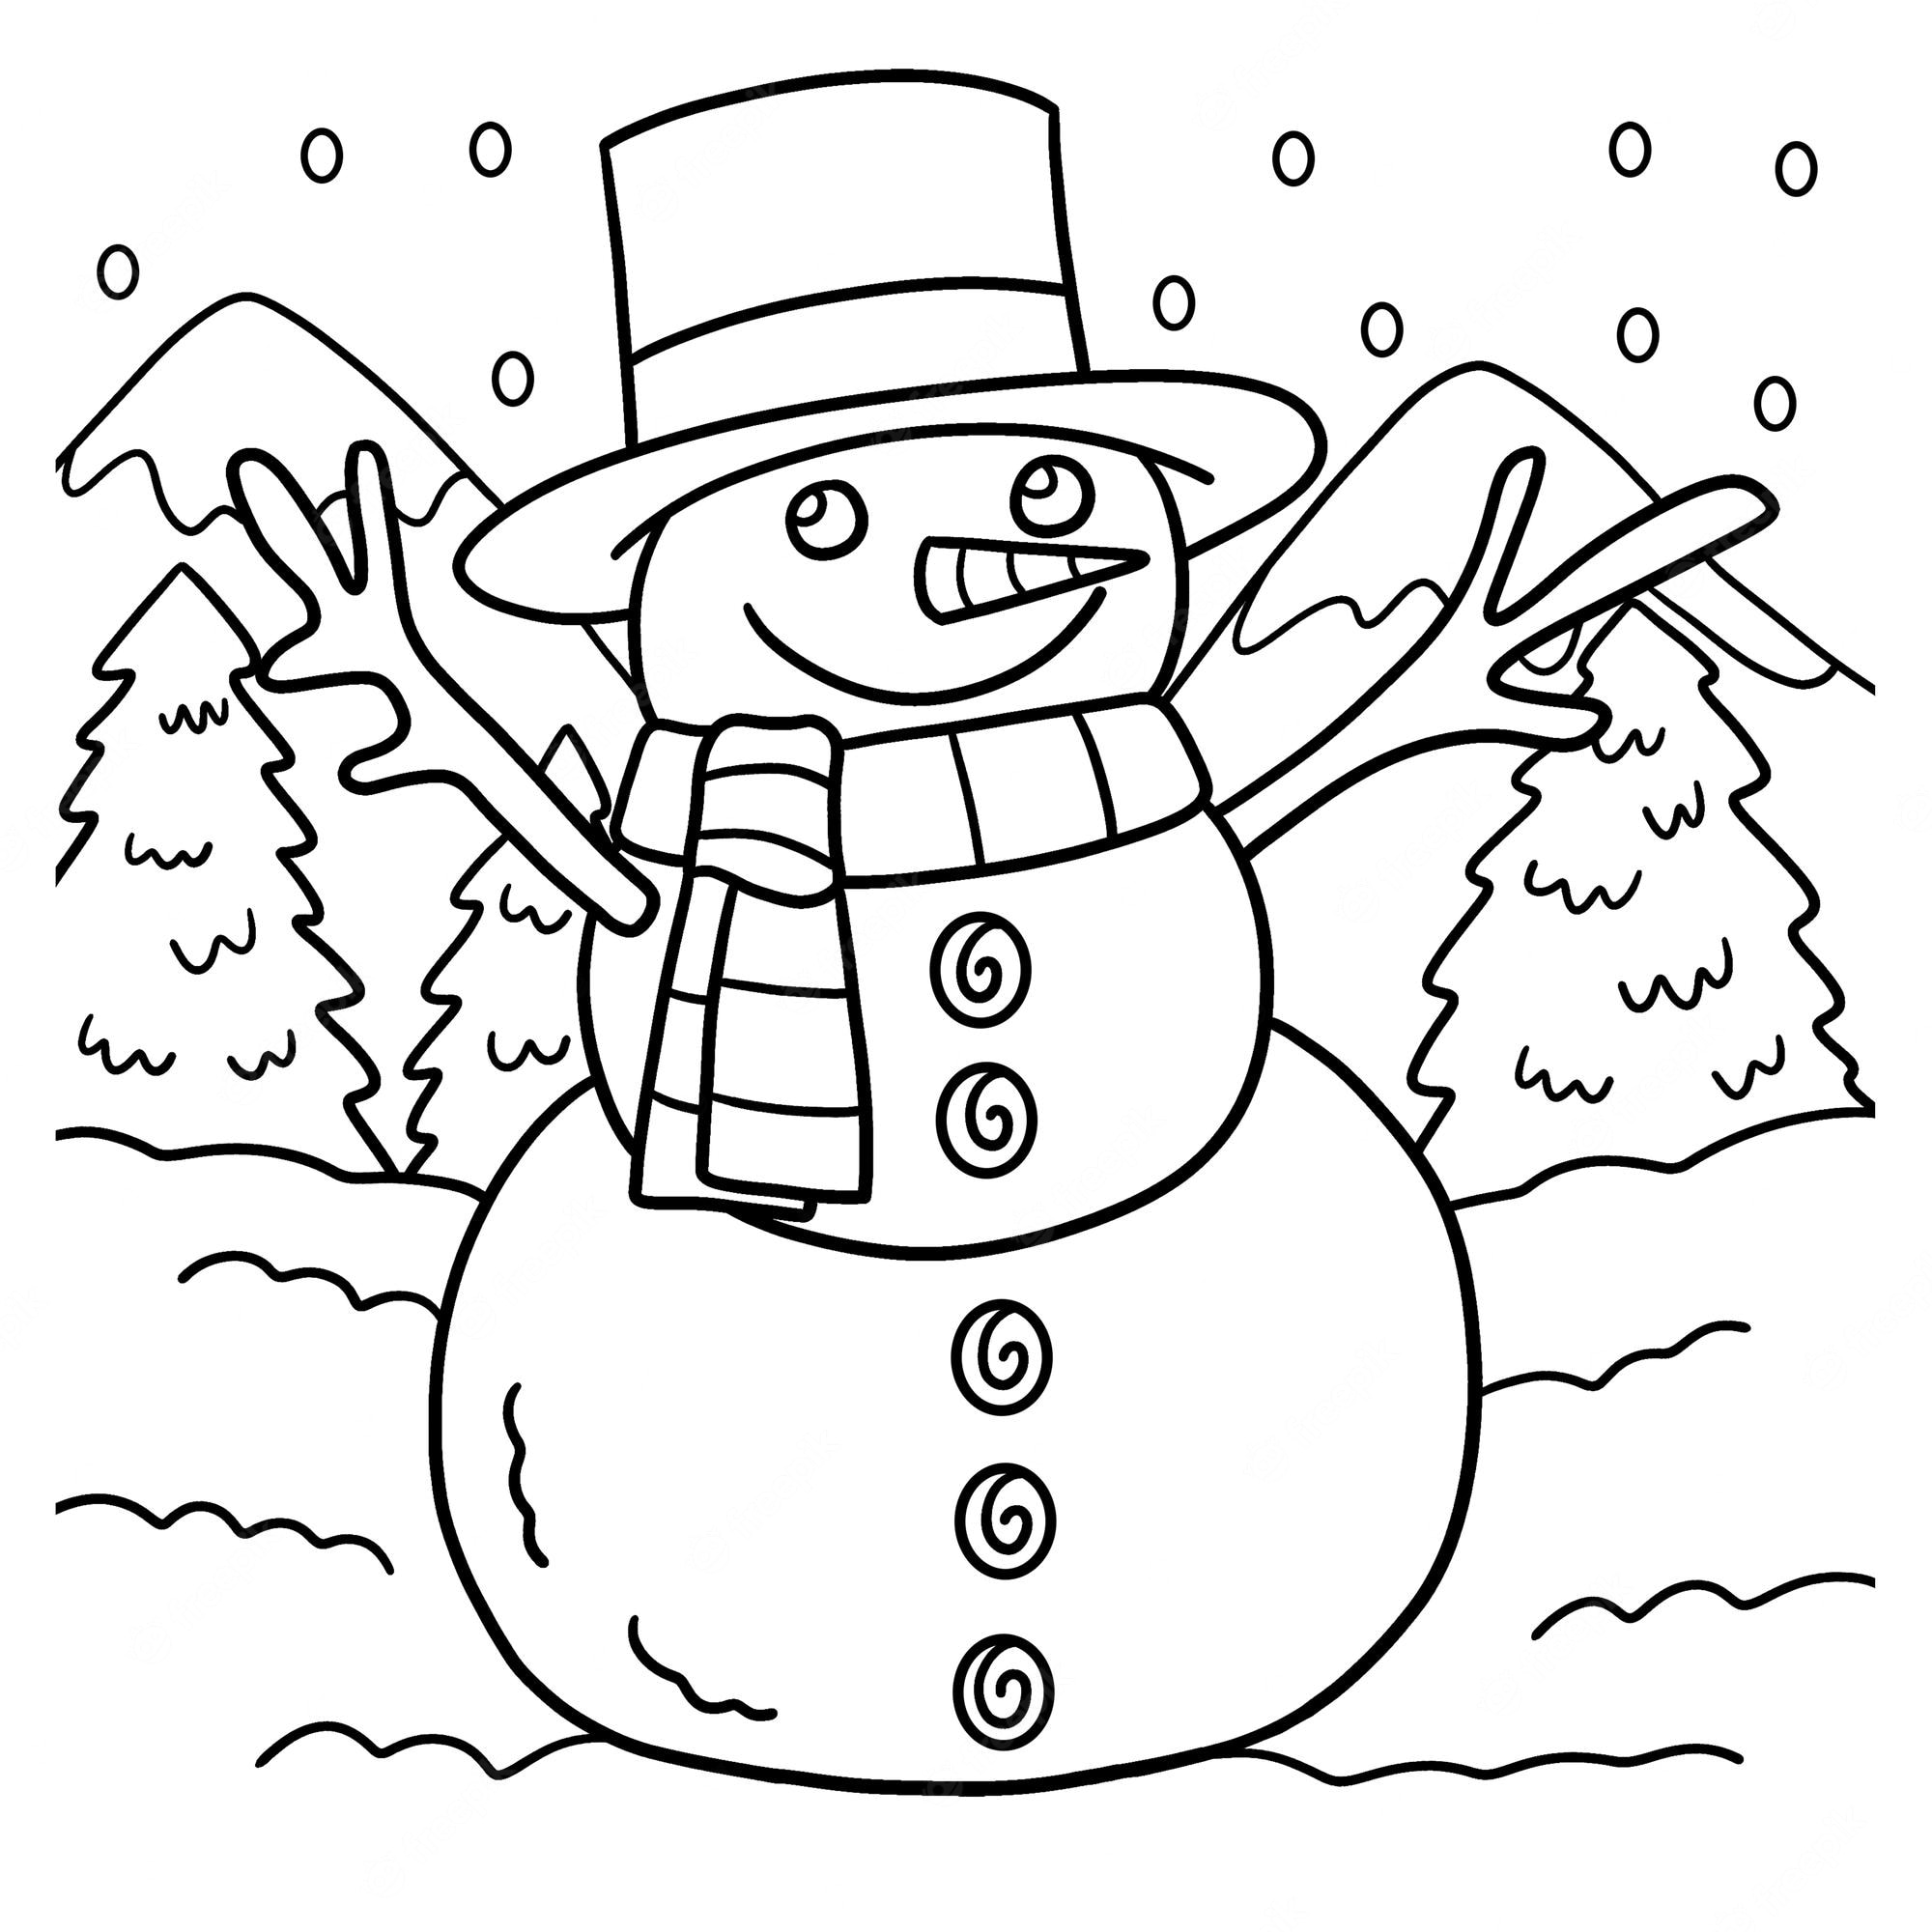 Snowman with broom #4